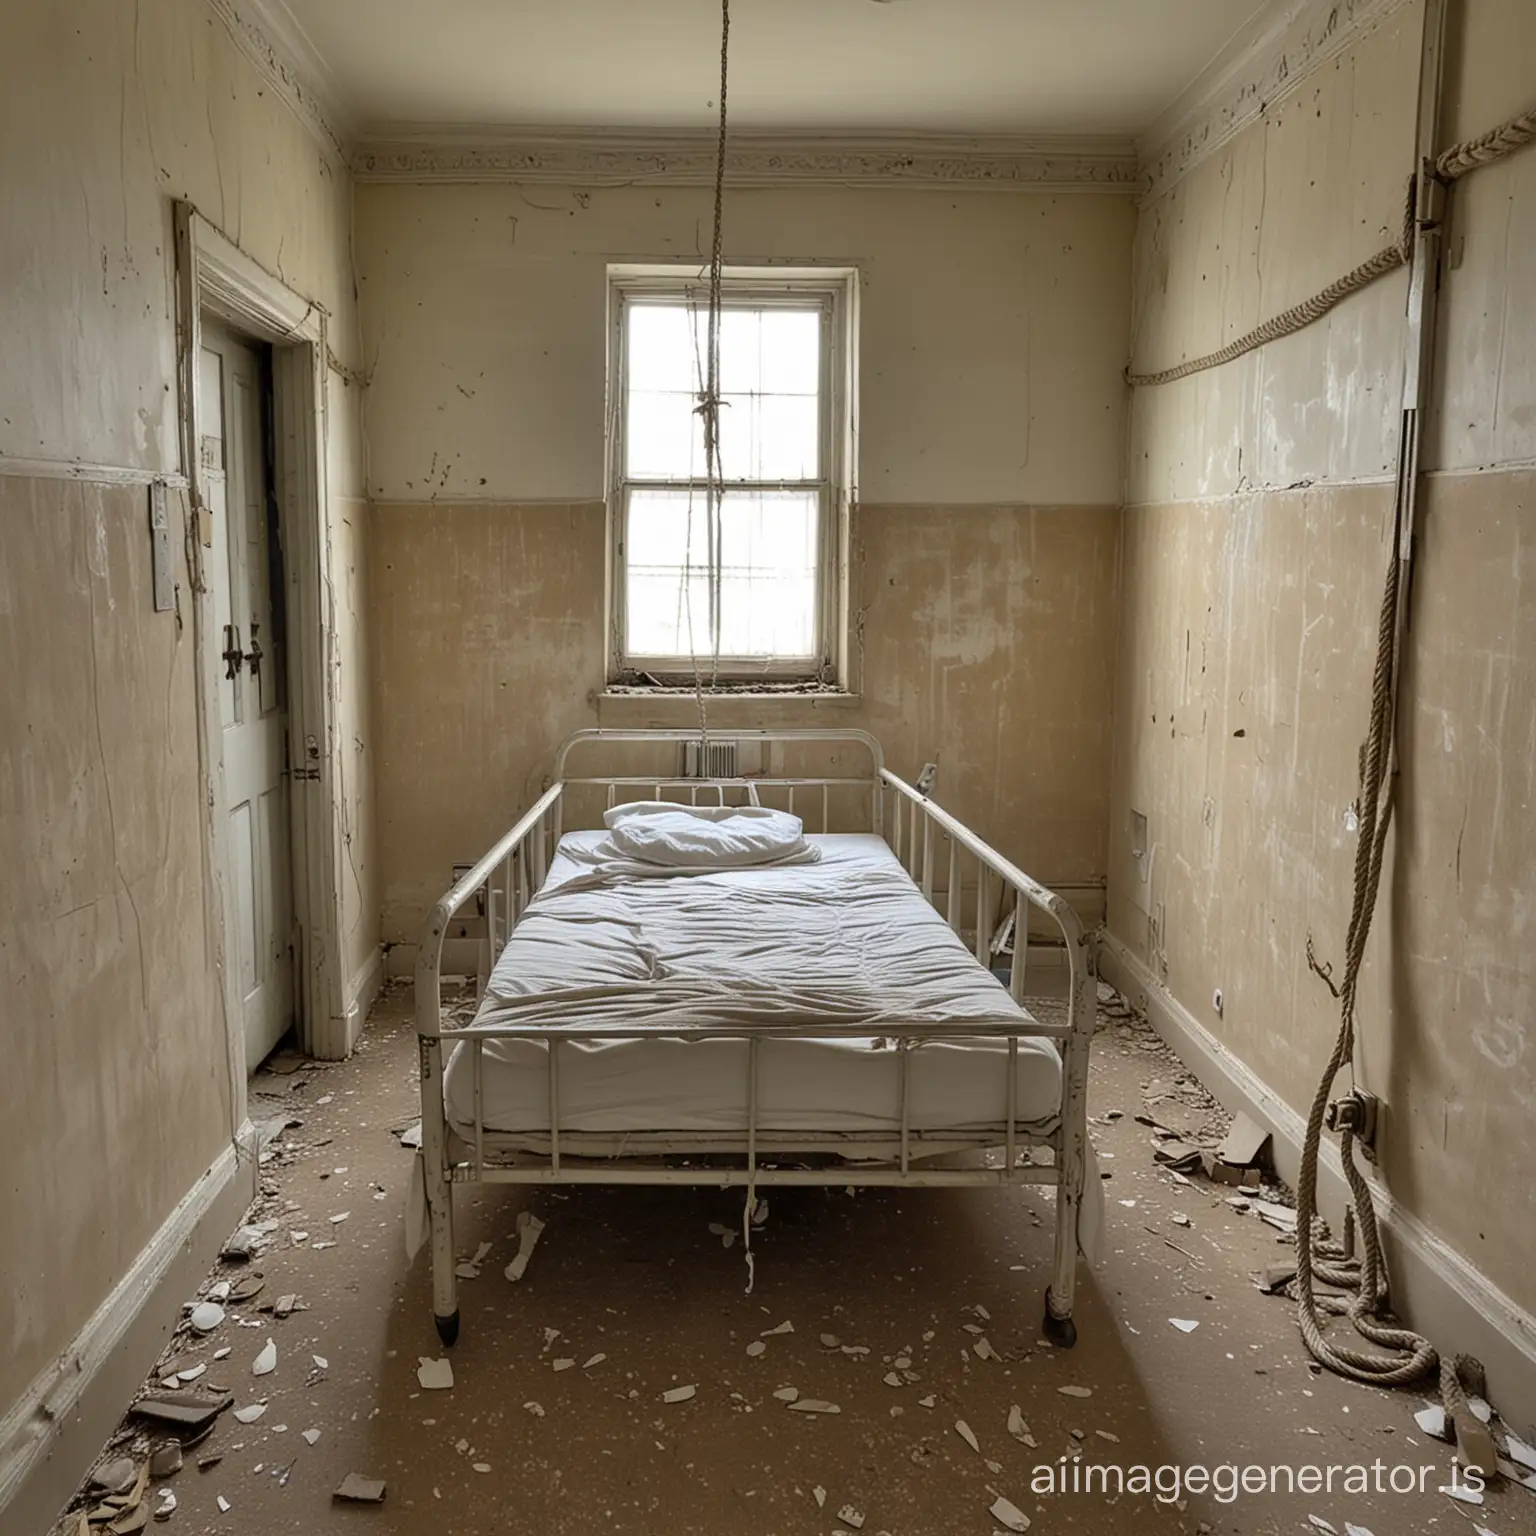 Psychiatric-Hospital-Interior-Bed-with-Ropes-and-Scuffed-Walls